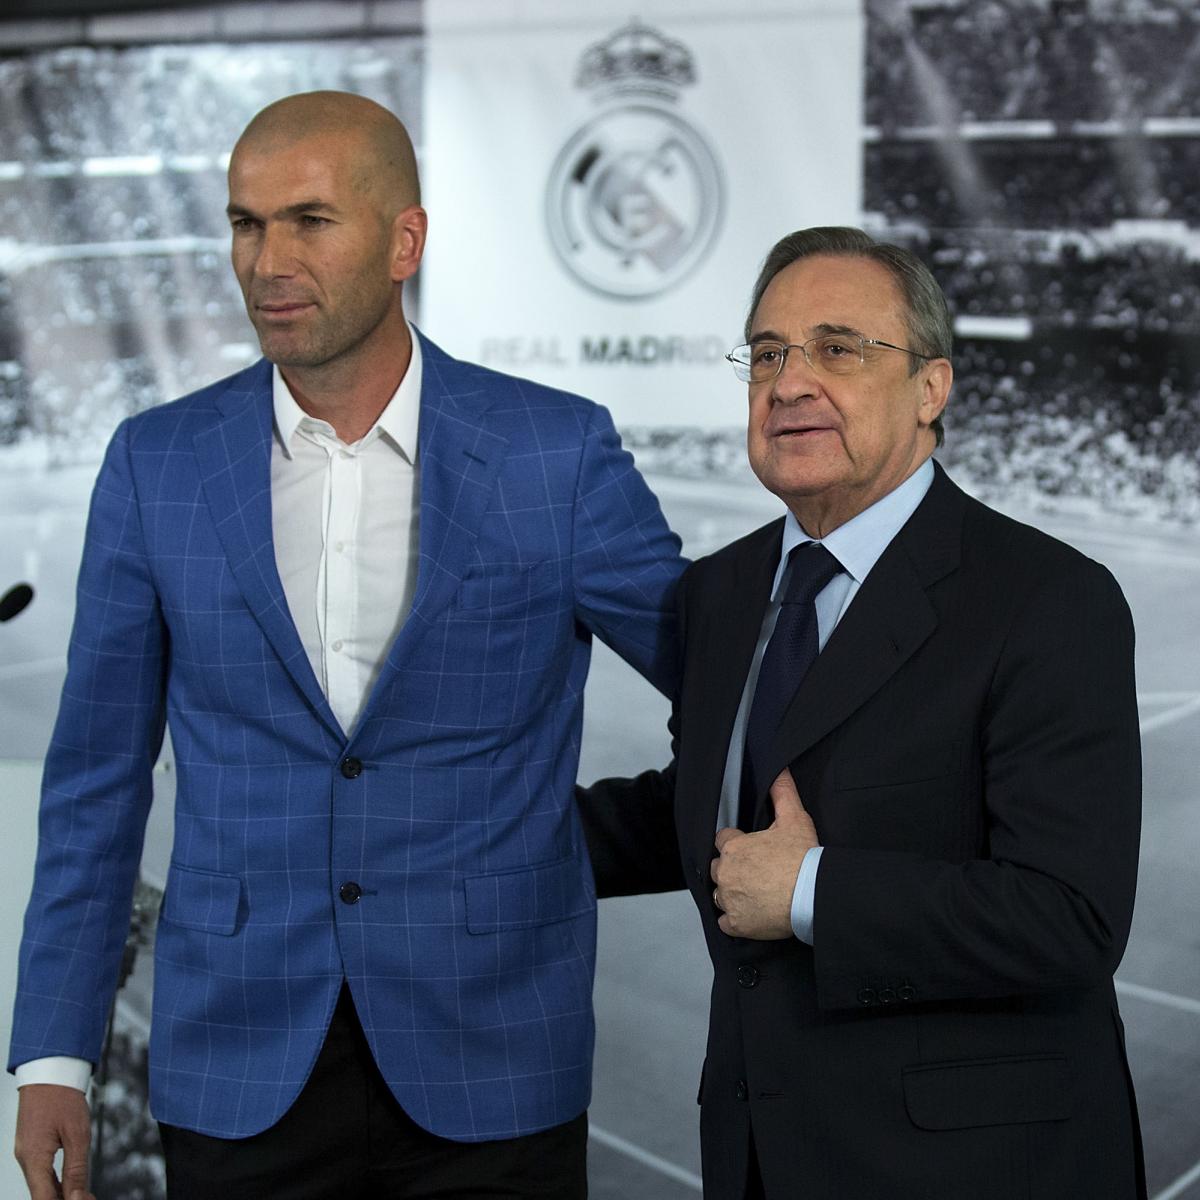 Real Madrid Need 3 Signings Before Transfer Ban to Compete for Champions League